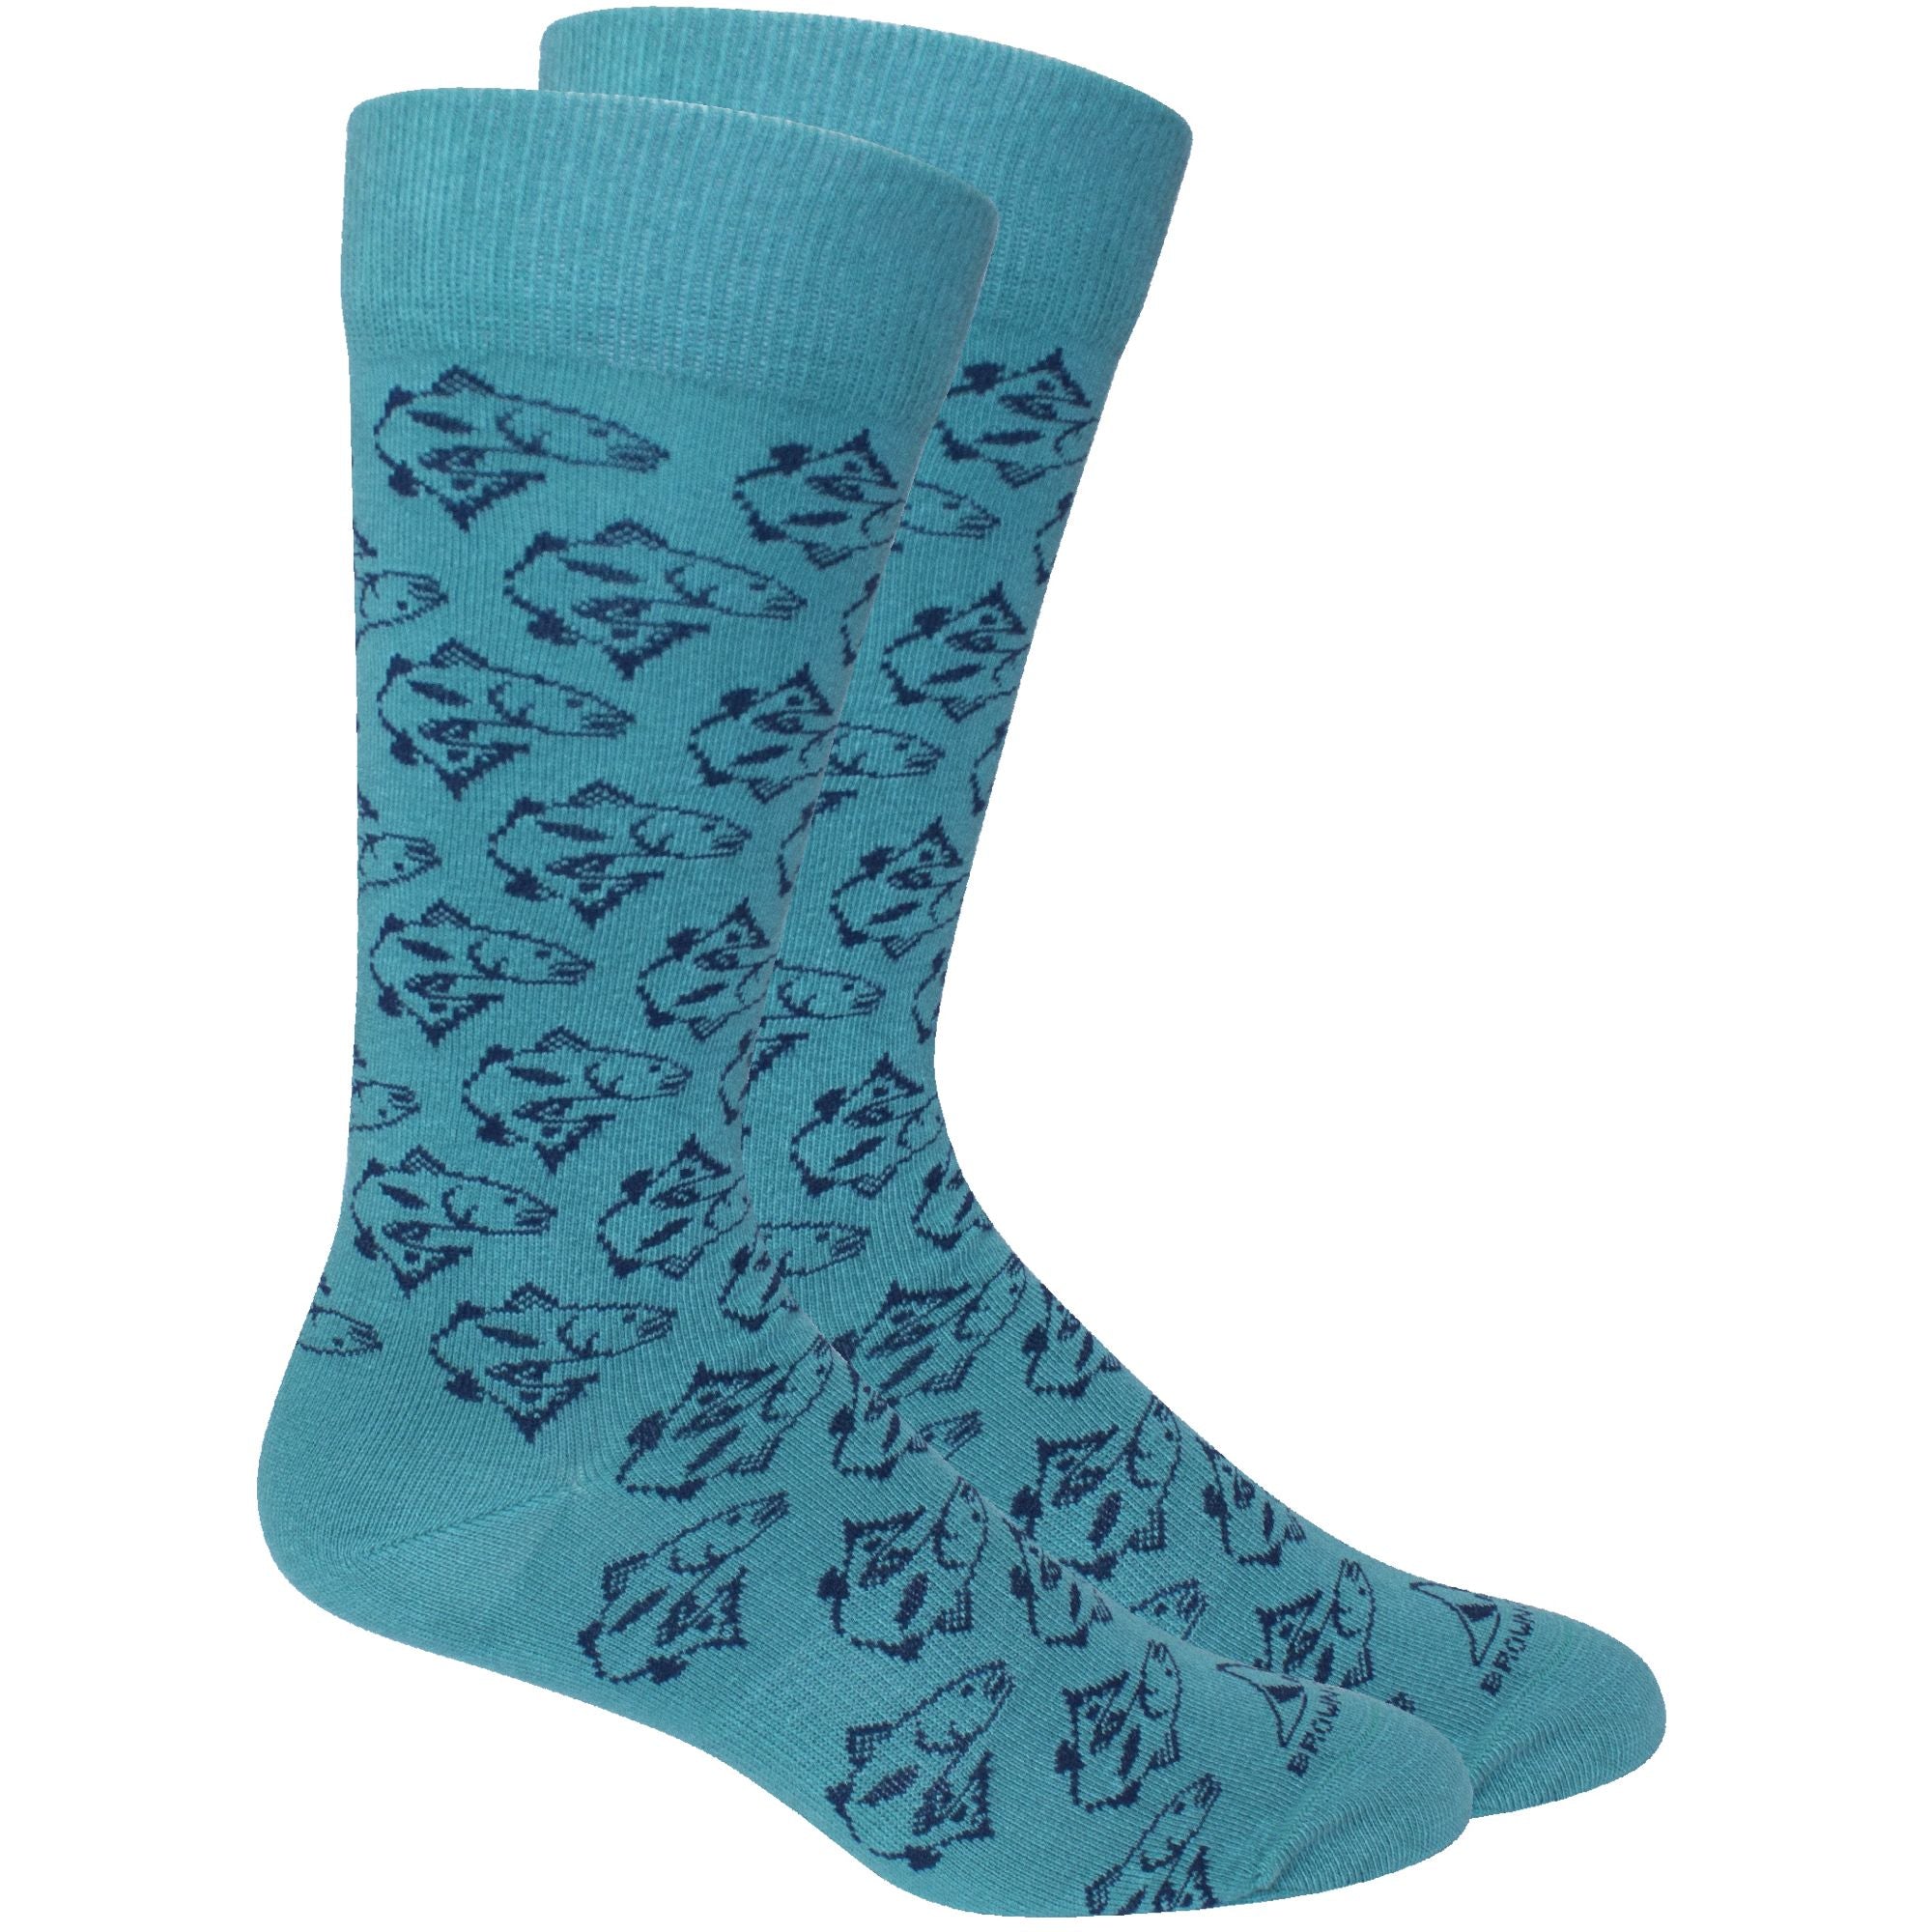 'Red Fish' Cotton Socks in Teal by Brown Dog Hosiery